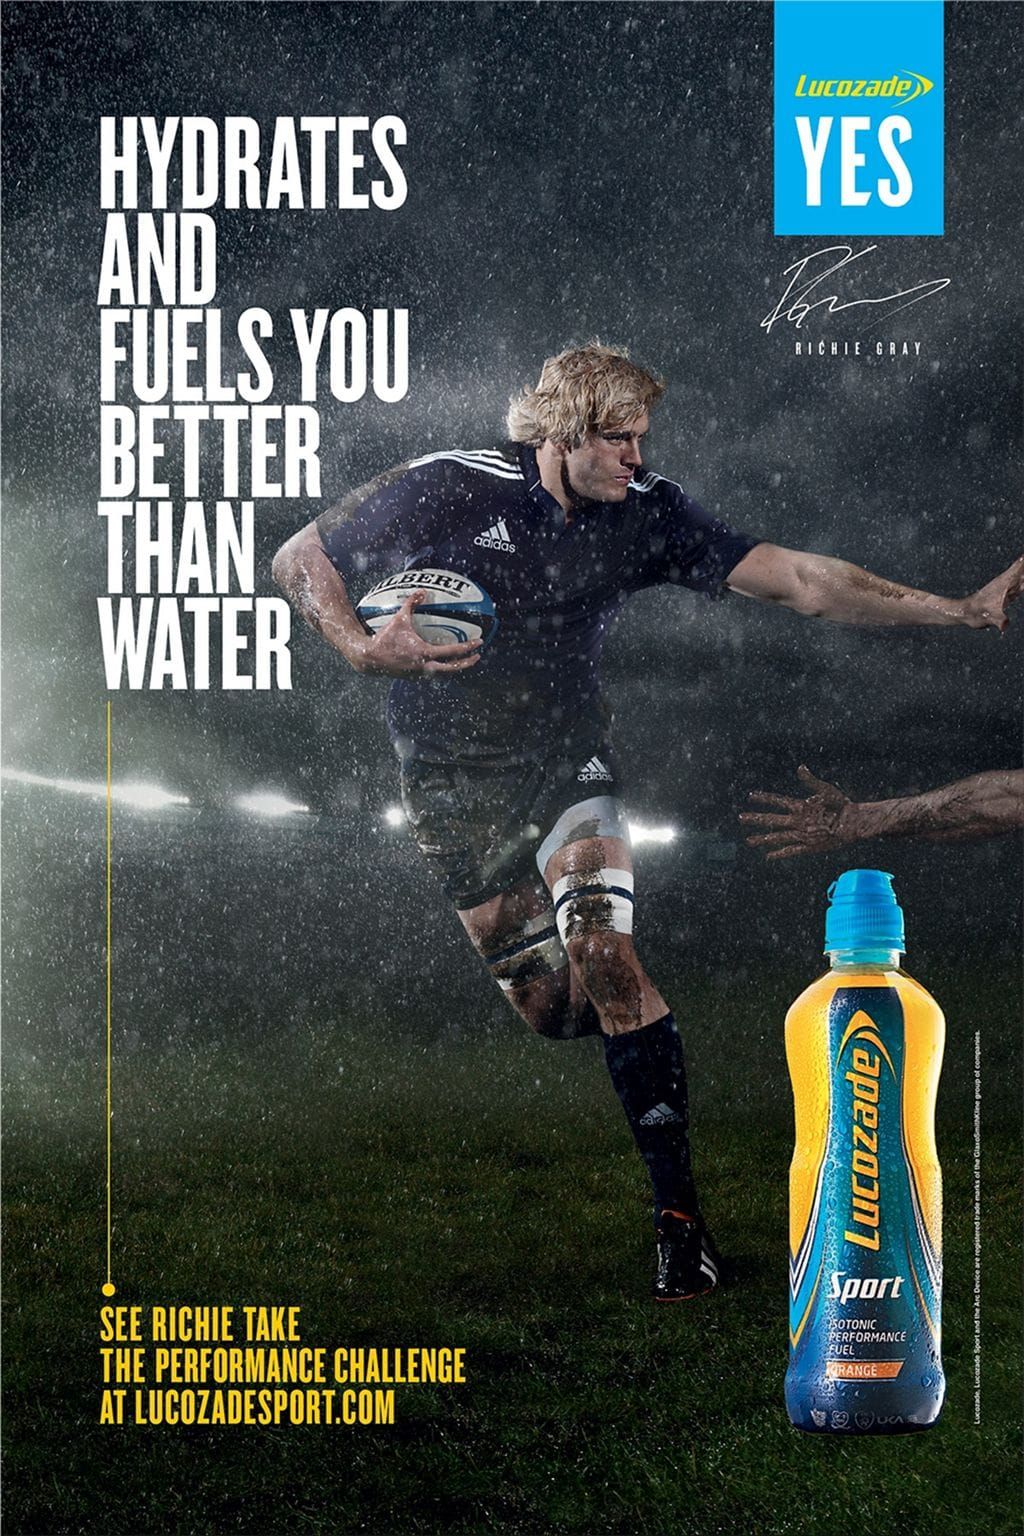 New rugby brand ambassadors|Lucozade ads